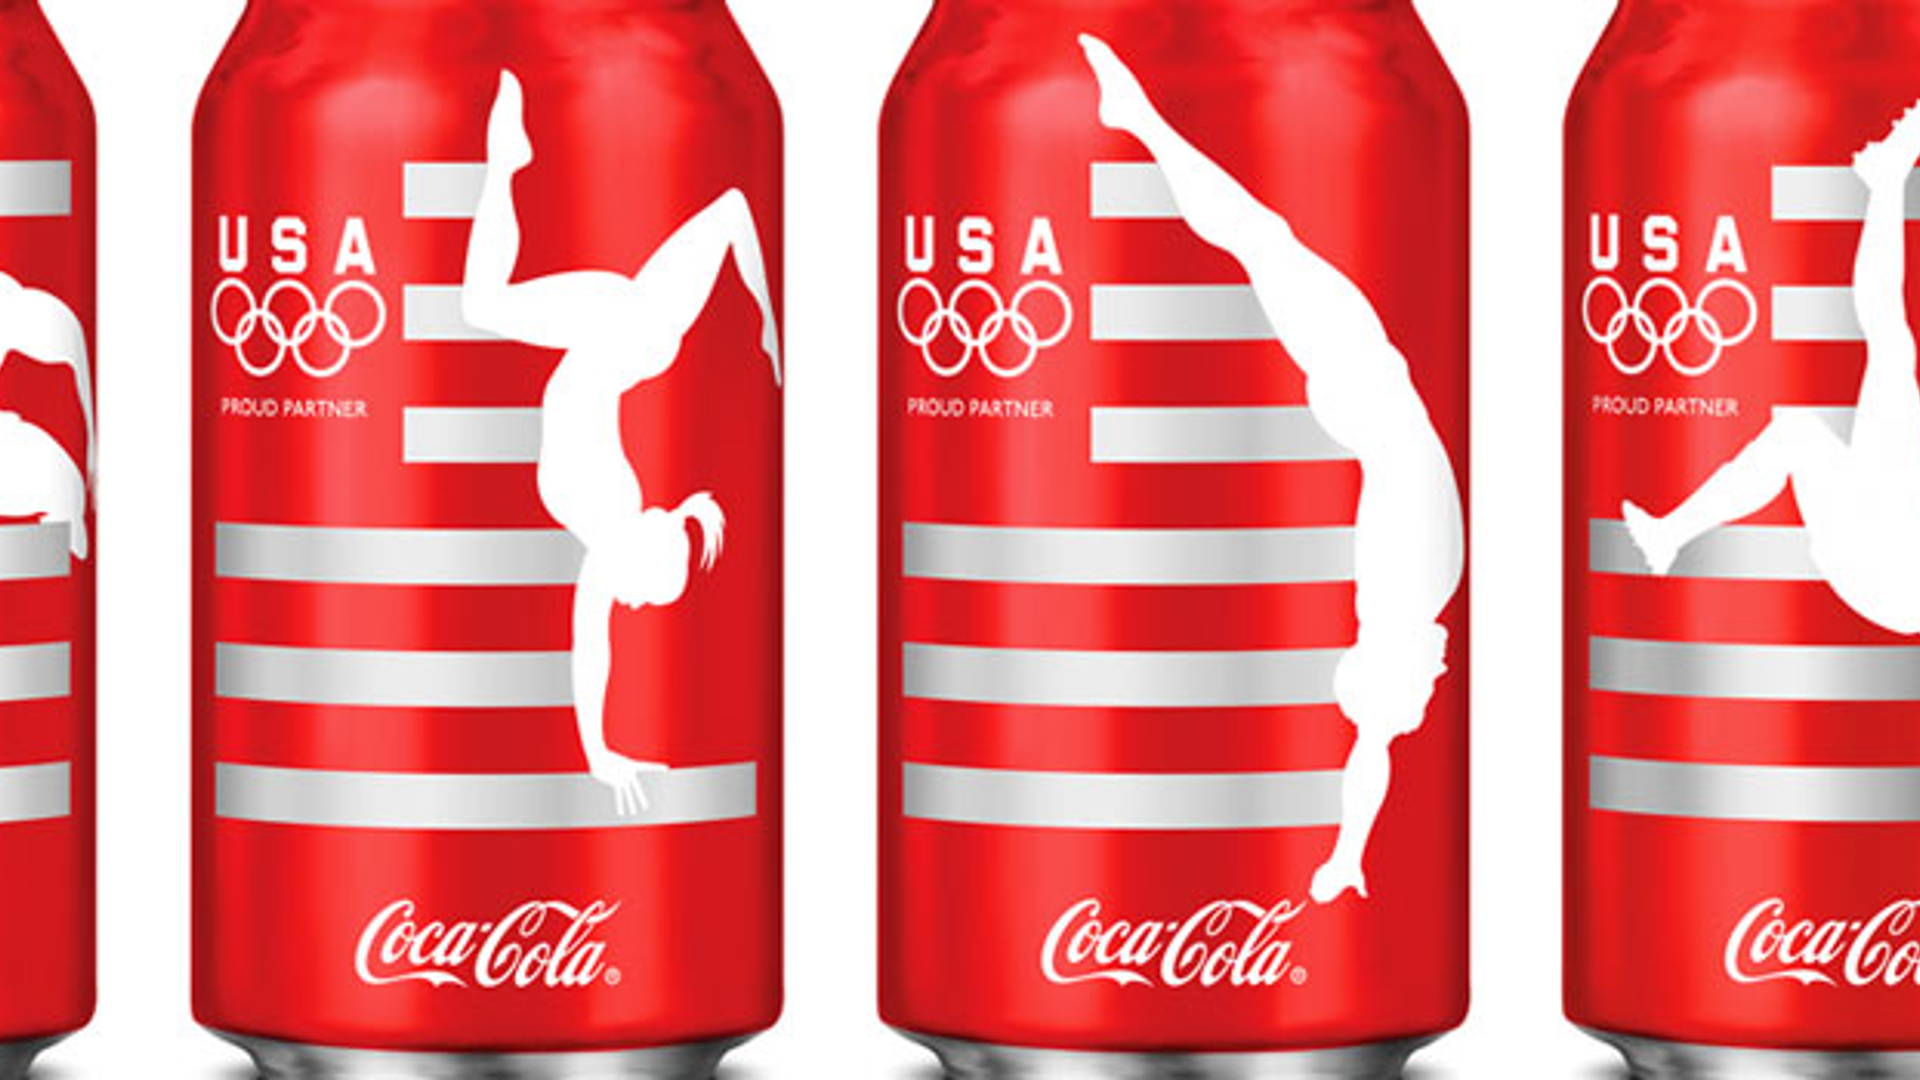 Featured image for Coca-Cola packaging for The Olympic Games 